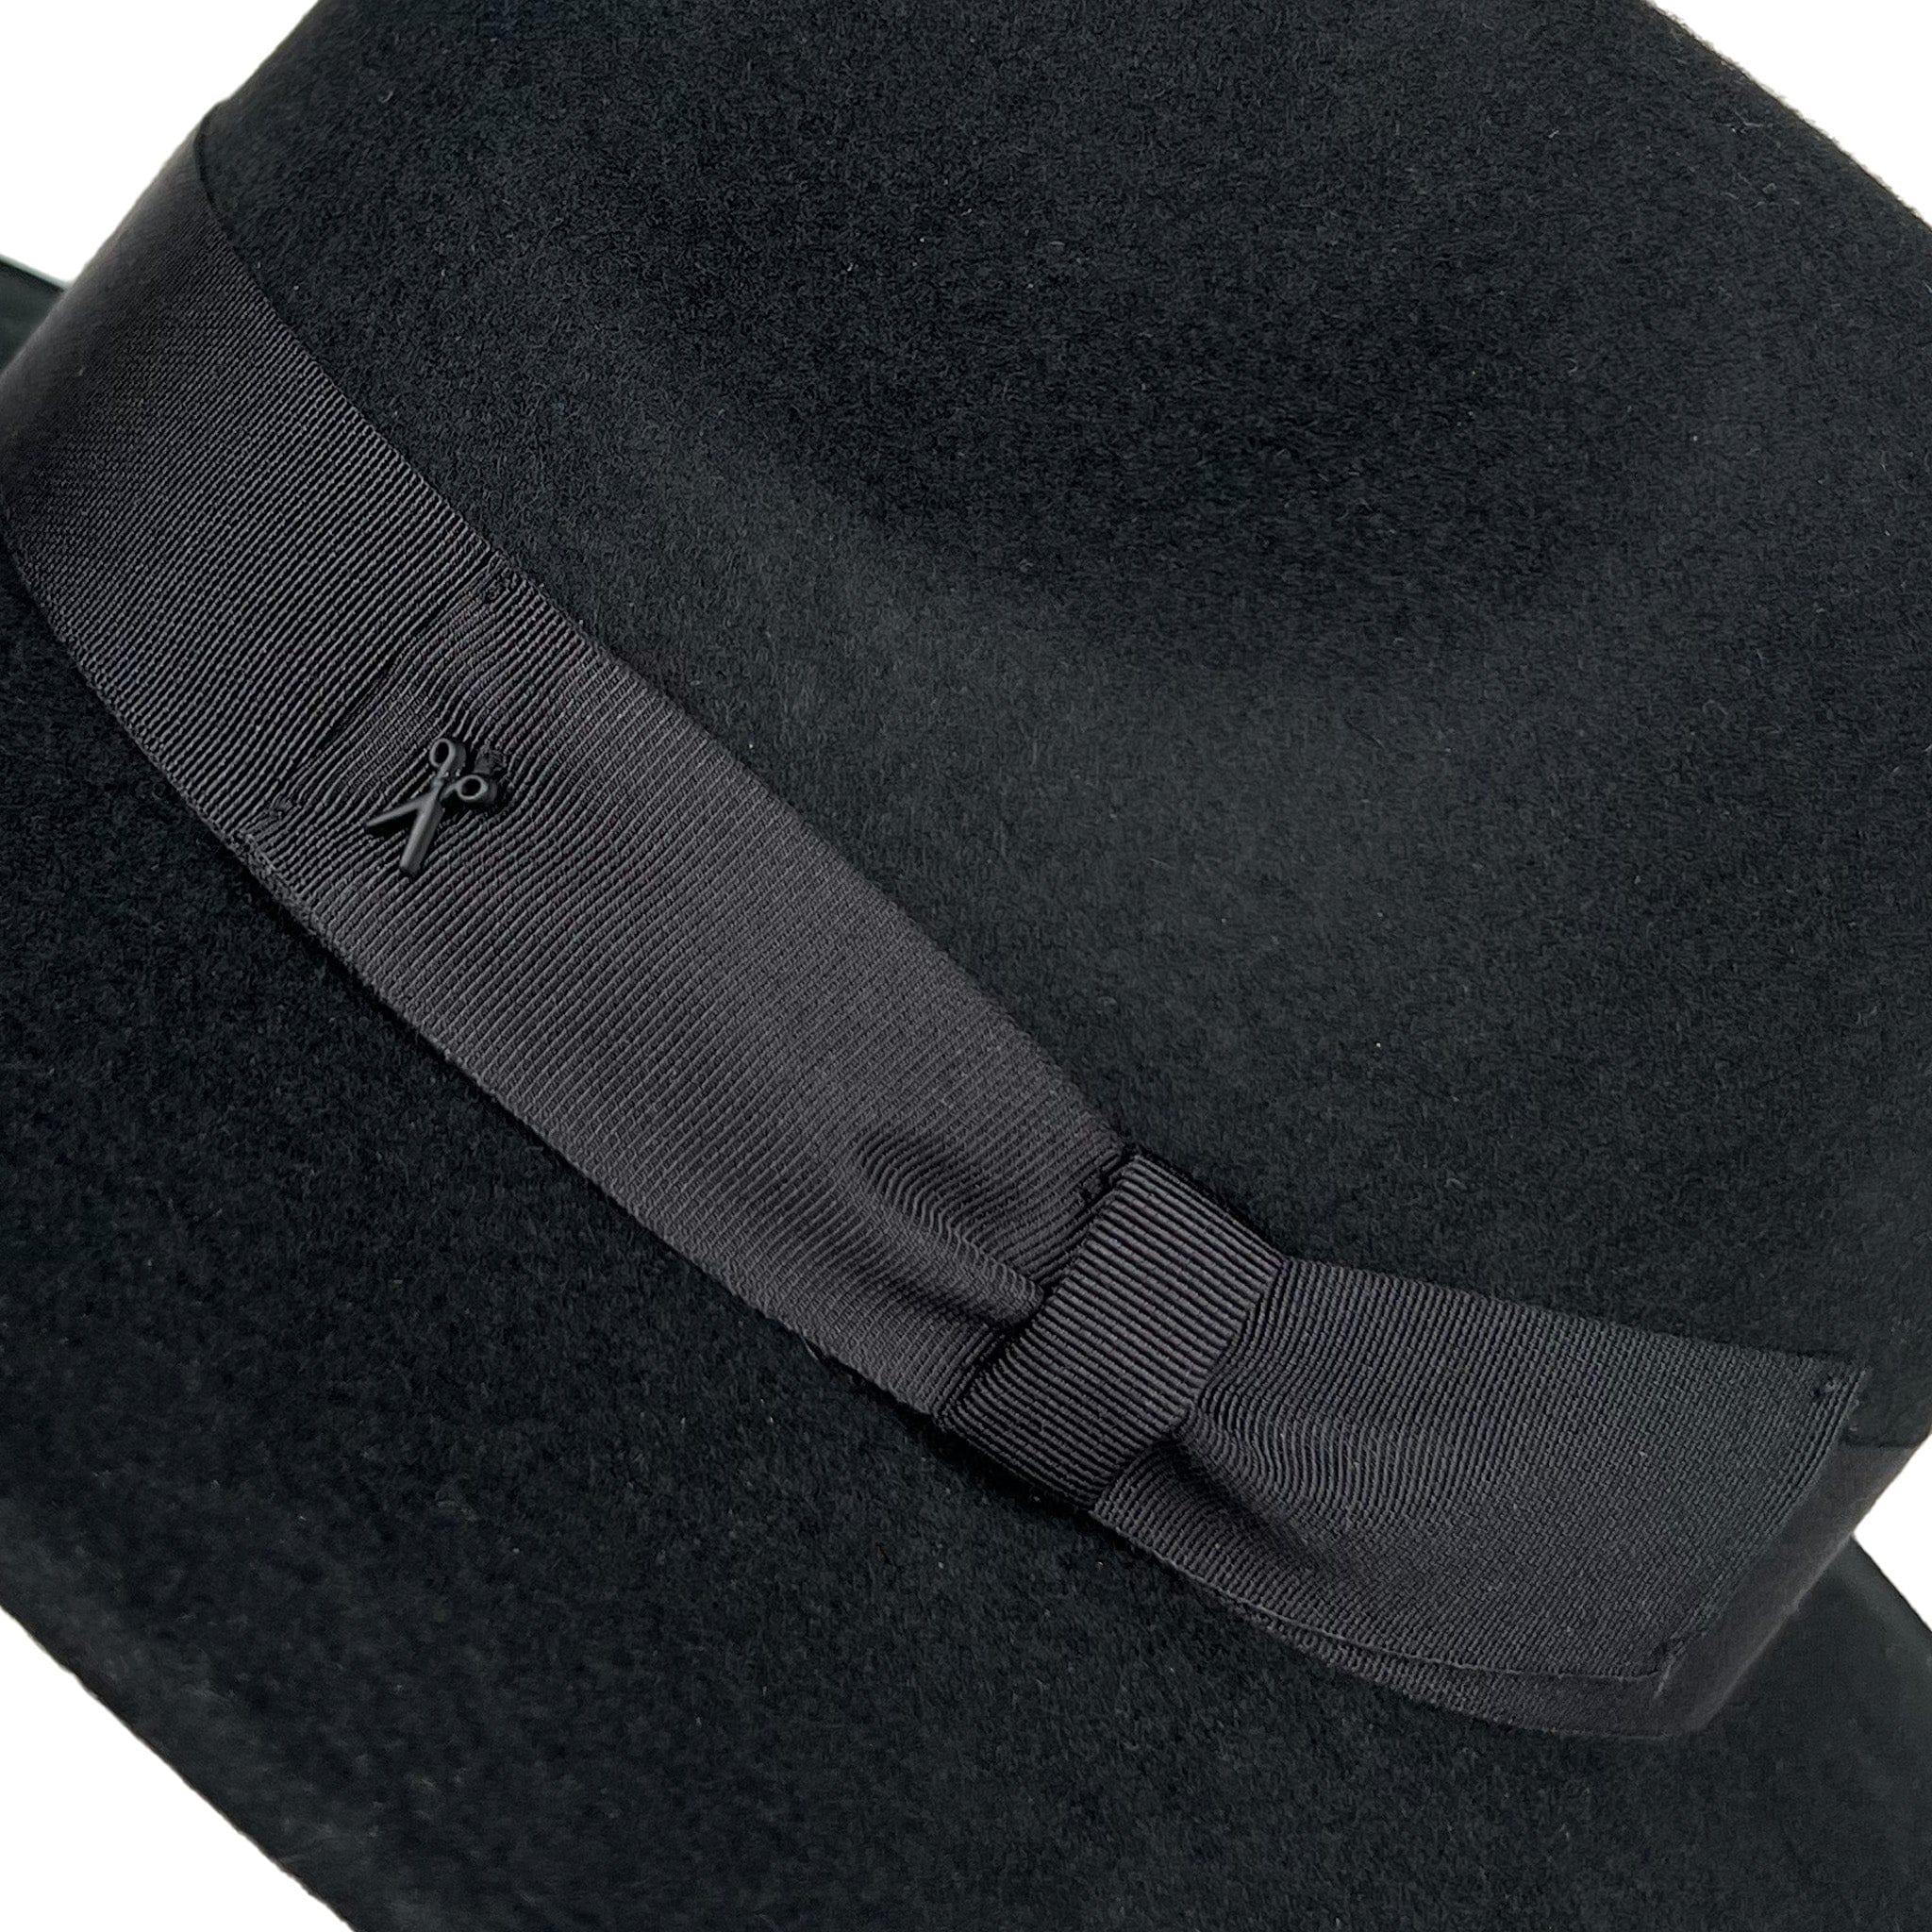 Virgin wool light felt fedora hat in black with black gross grain ribbon and bow, with iconic black crafted society scissor on the left side. 100% virgin wool, water repellent and crushable. zoomed in detail of bow and scissor